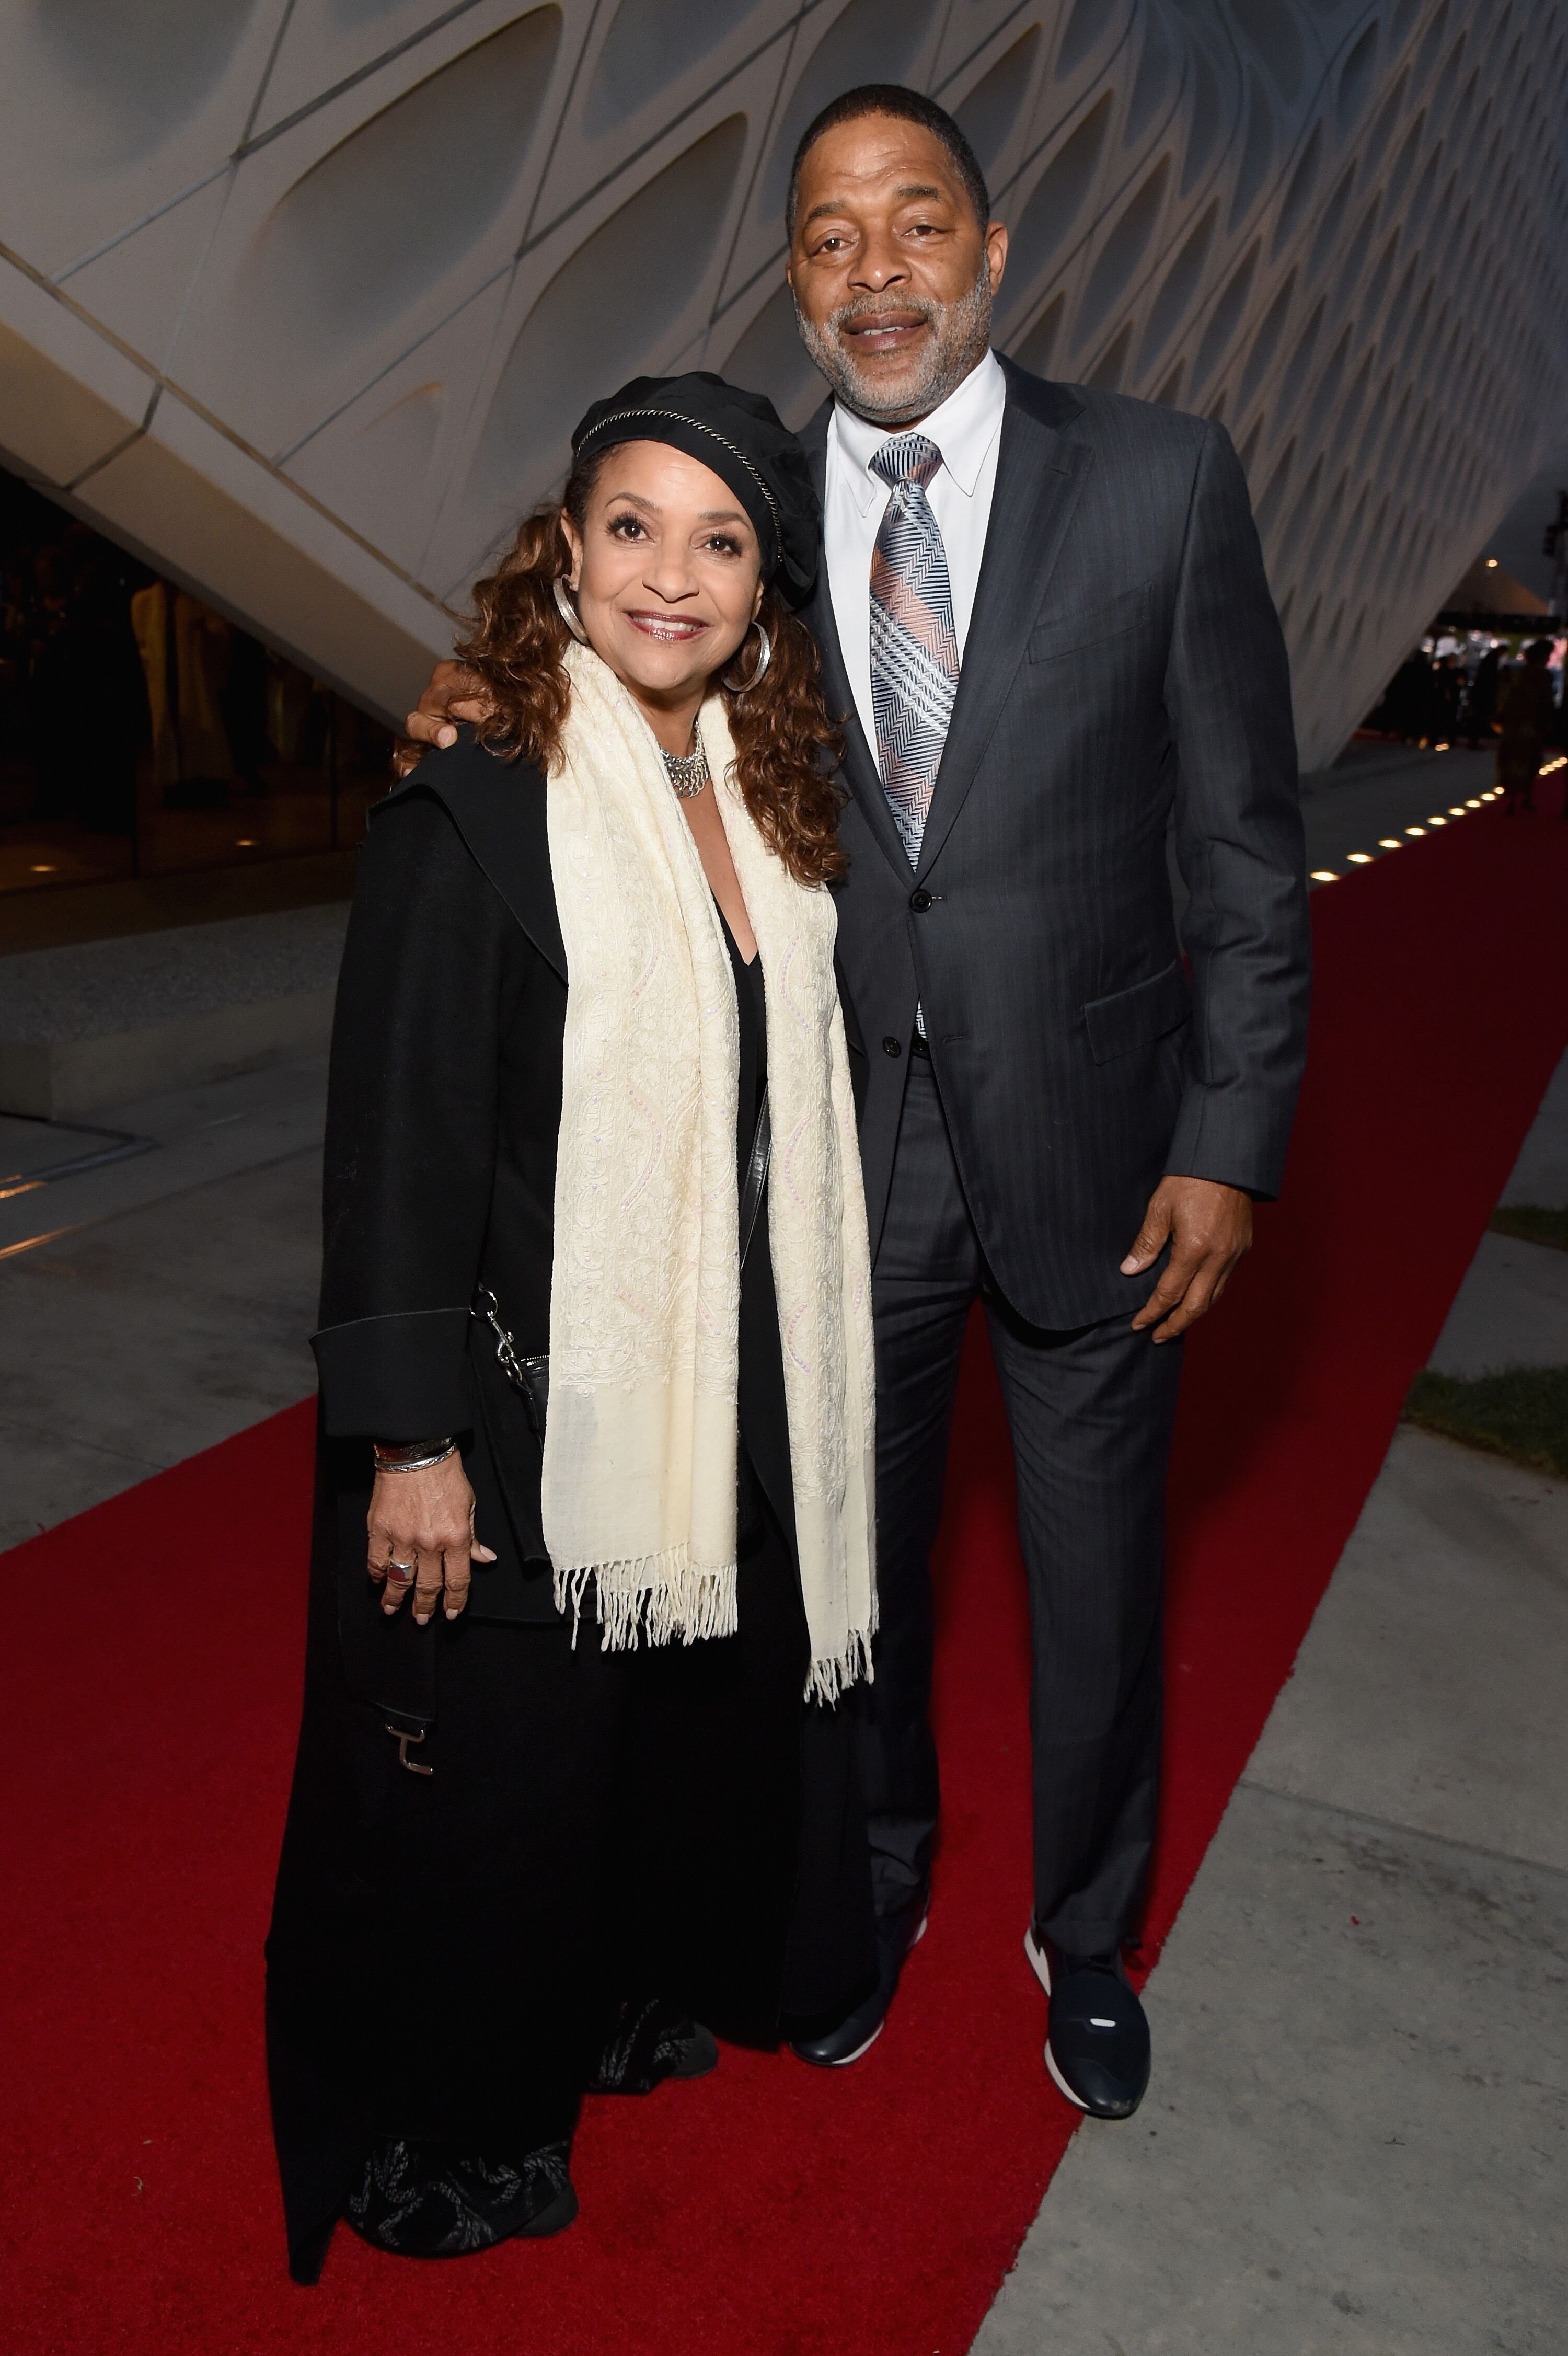 Debbie Allen and Norm Nixon celebrate with Land Rover at The Broad Museum's opening celebration of its new art exhibition on March 22, 2019. | Photo: Getty Images